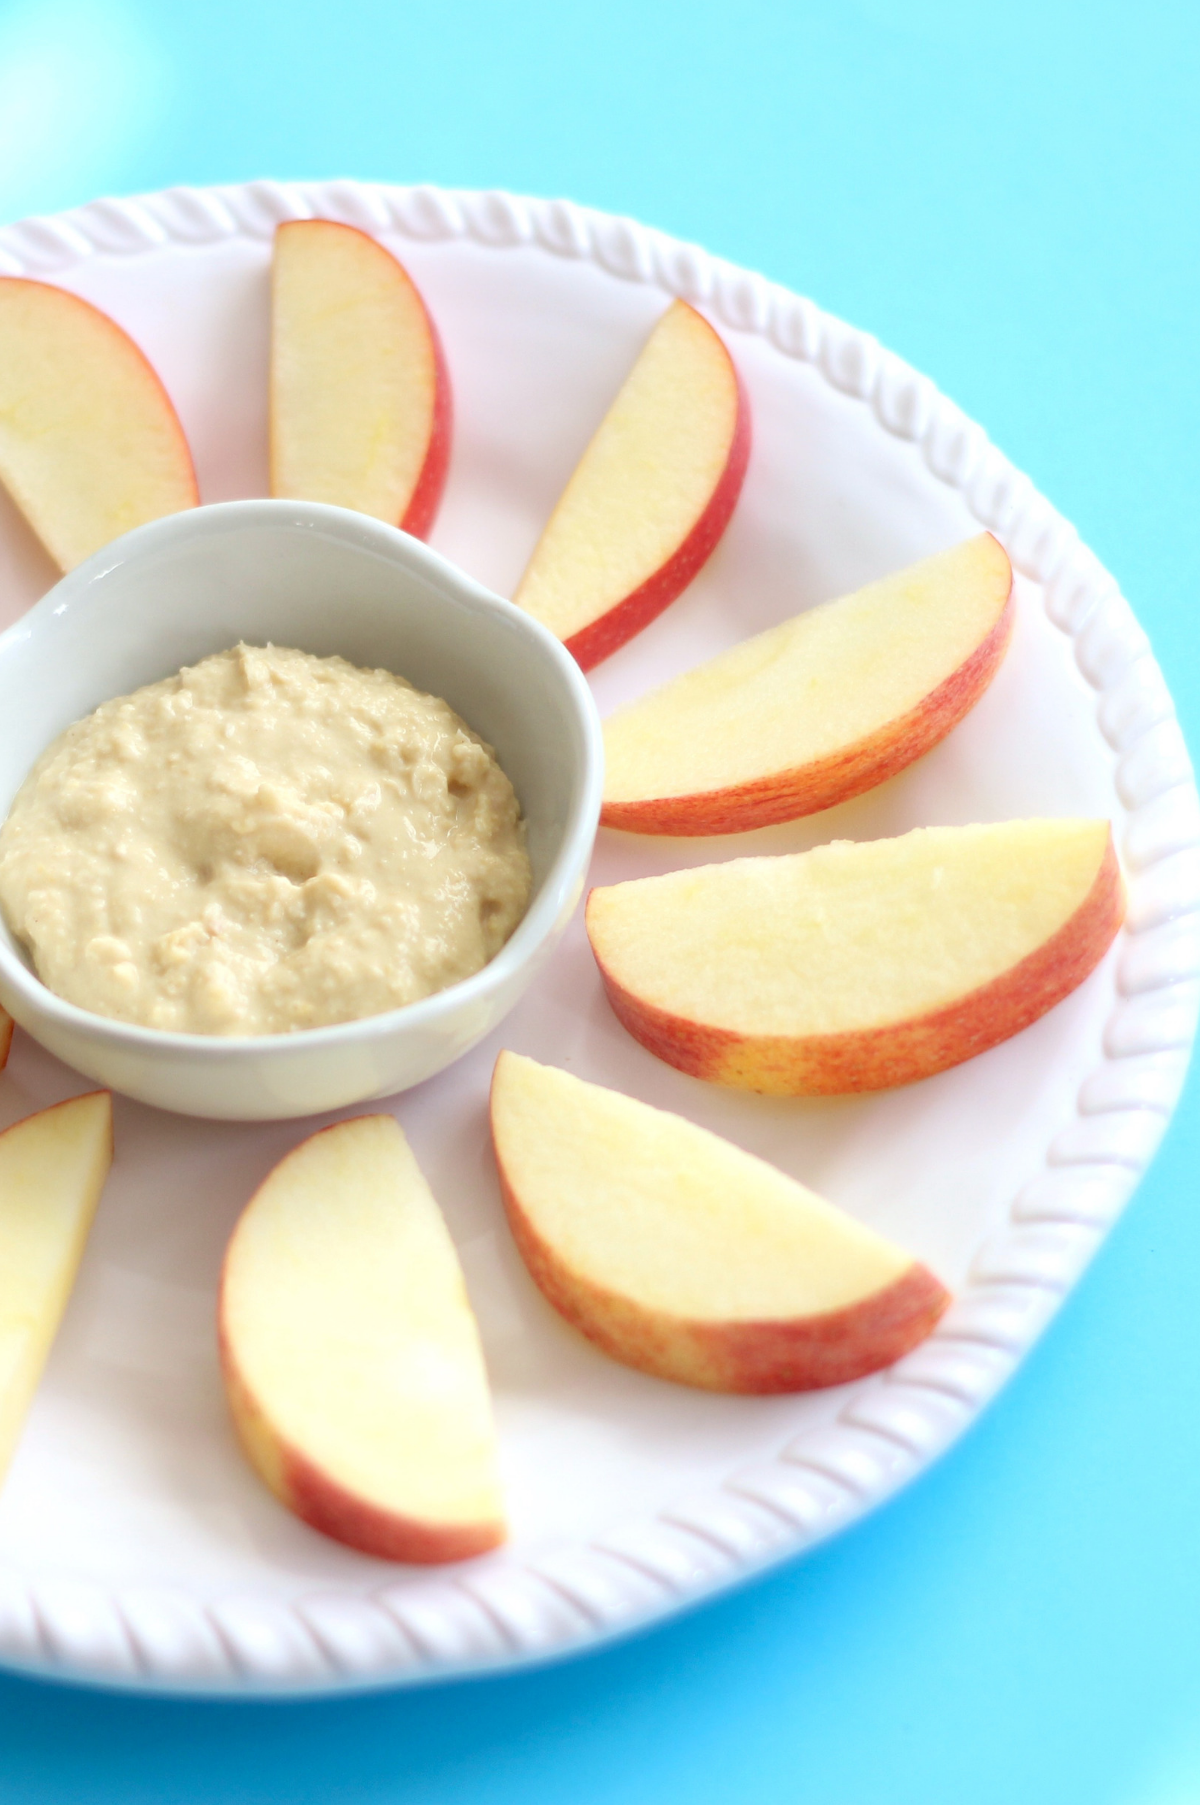 Healthy 5-Minute Snacks: apple slices and hummus